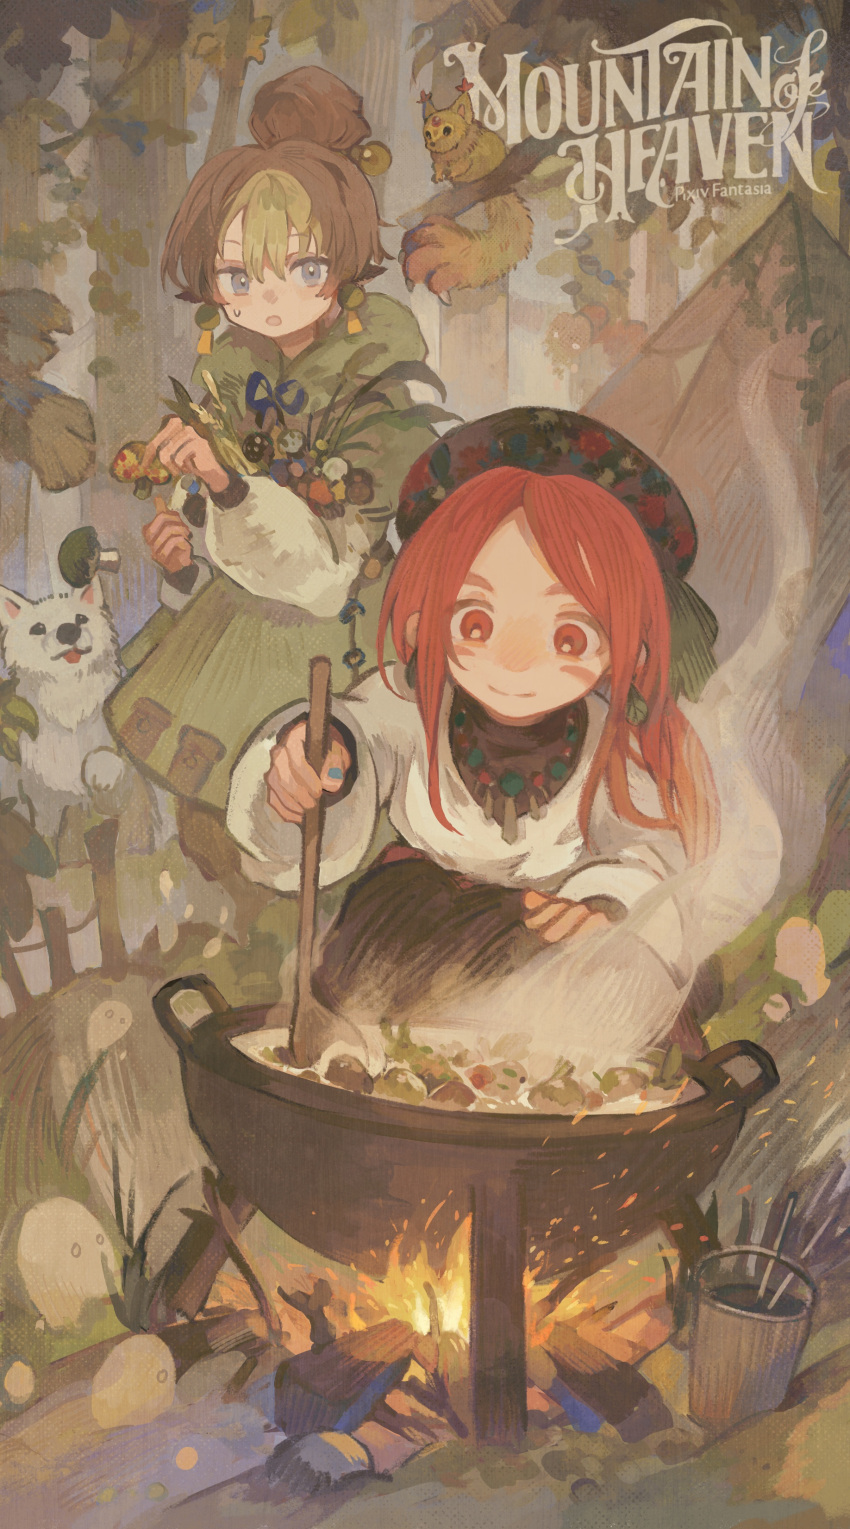 1boy 1girl absurdres agneta_(mountain_of_heaven) animal animal_ears blonde_hair blue_eyes brown_hair bucket copyright_name dog fire forest hair_bun highres jewelry juneliu927 long_hair luo_(mountain_of_heaven) multicolored_hair mushroom nature necklace outdoors pixiv_fantasia pixiv_fantasia_mountain_of_heaven pot red_eyes red_hair short_hair spoon steam stew sweat tent two-tone_hair